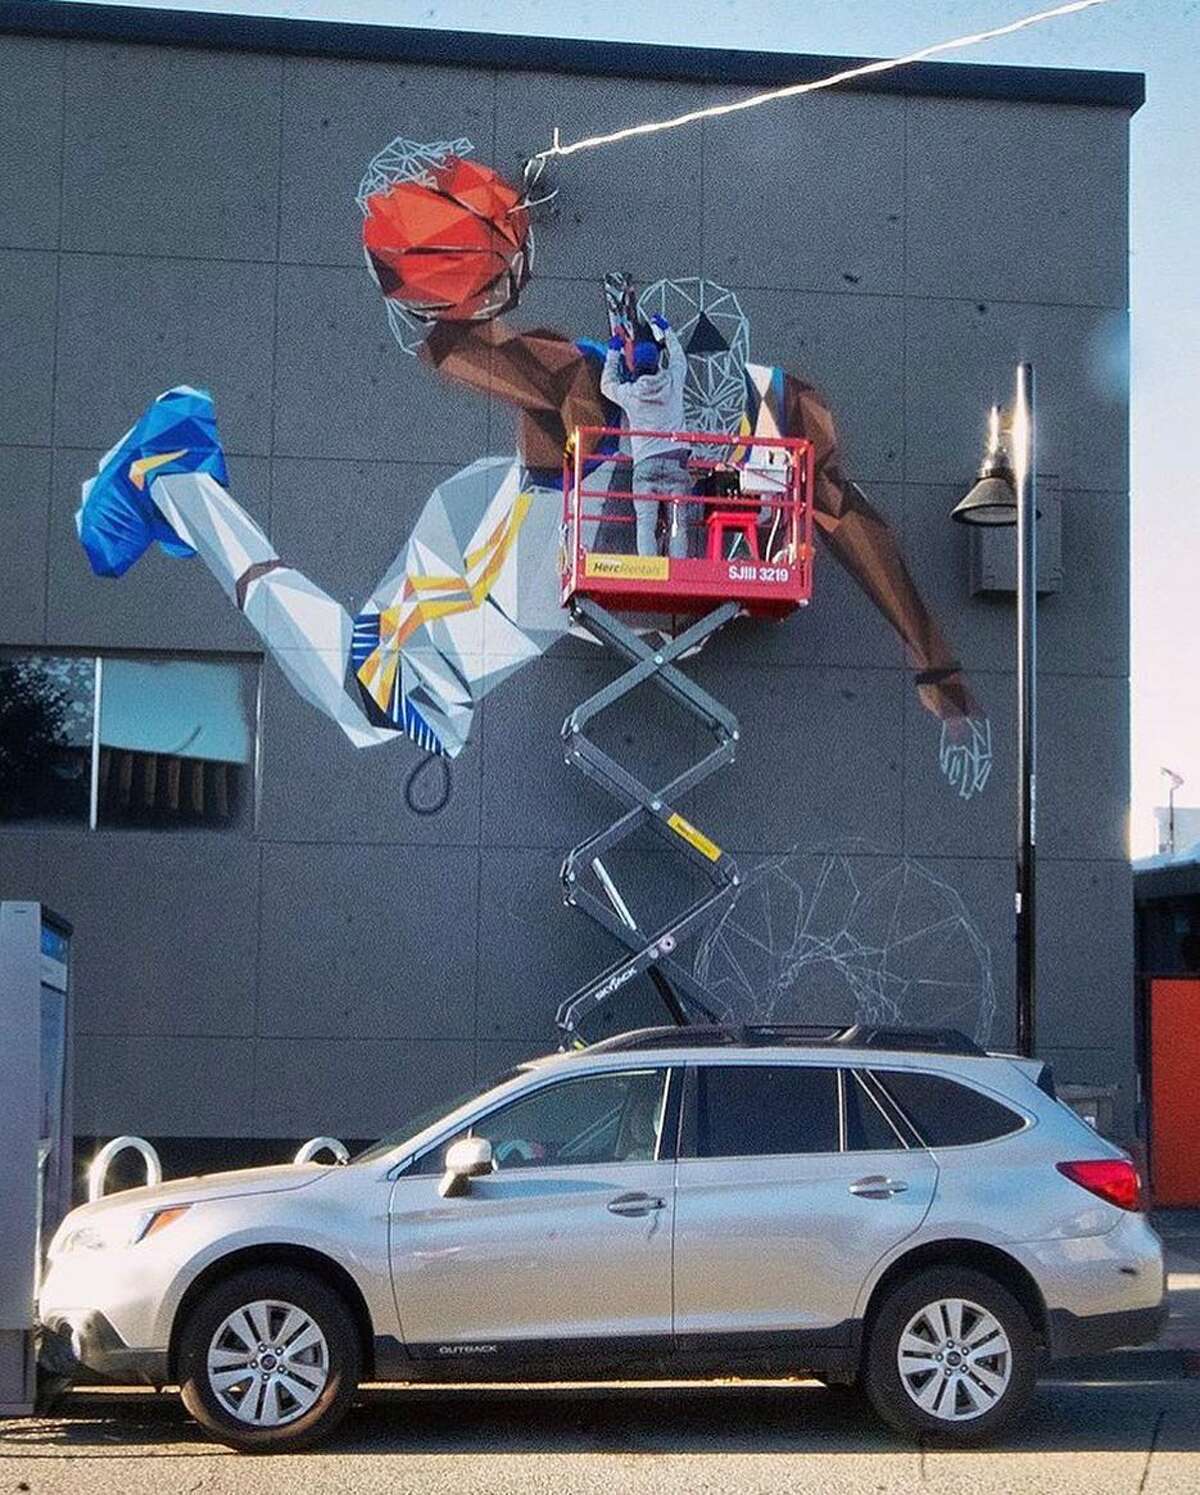 A new mural depicting Golden State Warriors forward Kevin Durant has gone up in Oakland's Temescal neighborhood.